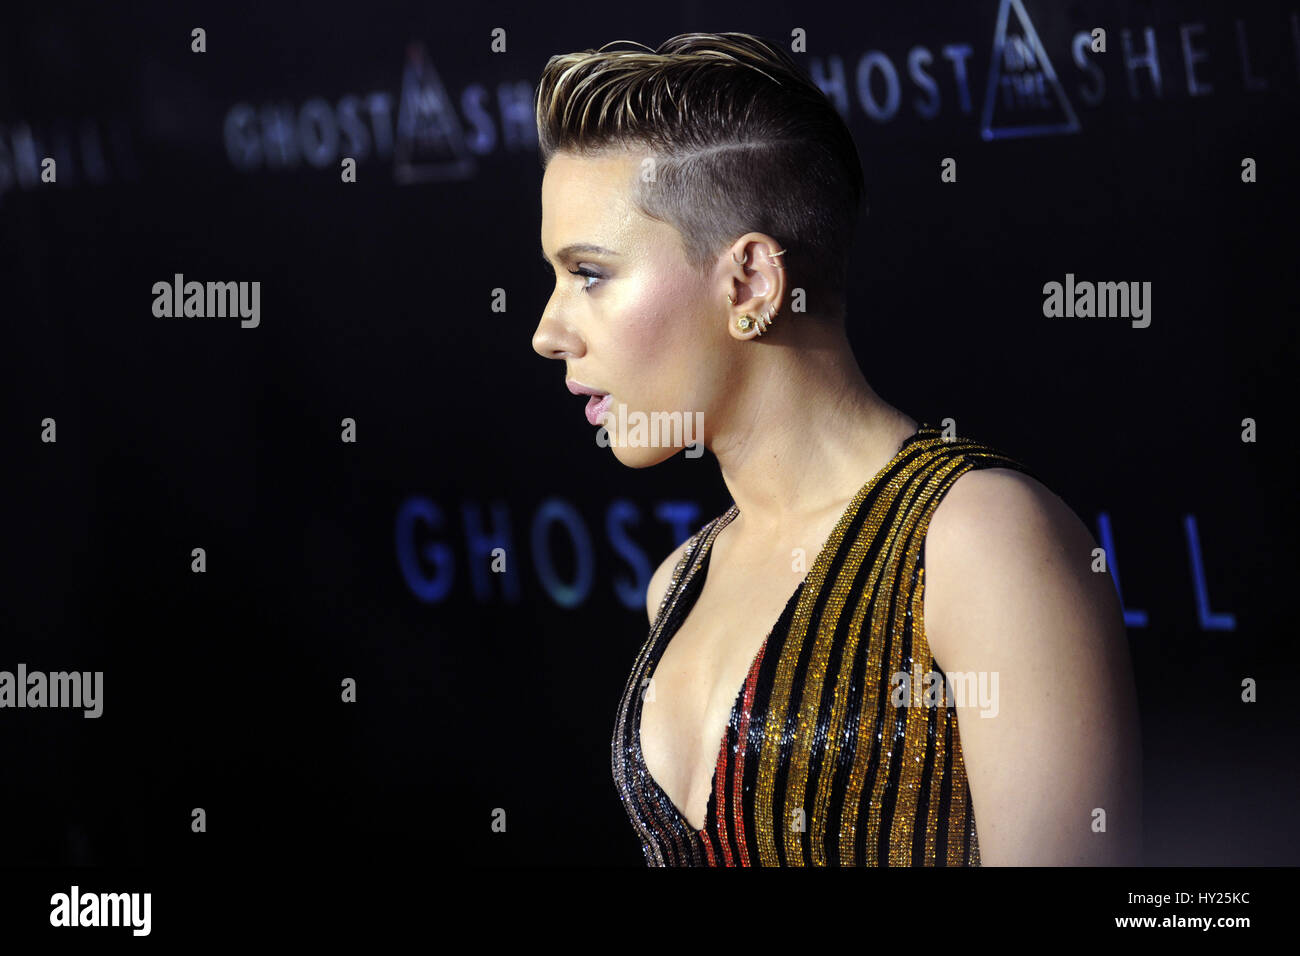 New York City. 29th Mar, 2017. Scarlett Johansson attends the 'Ghost in the Shell' premiere at AMC Lincoln Square 13 on March 29, 2017 in New York City. | Verwendung weltweit/picture alliance Credit: dpa/Alamy Live News Stock Photo